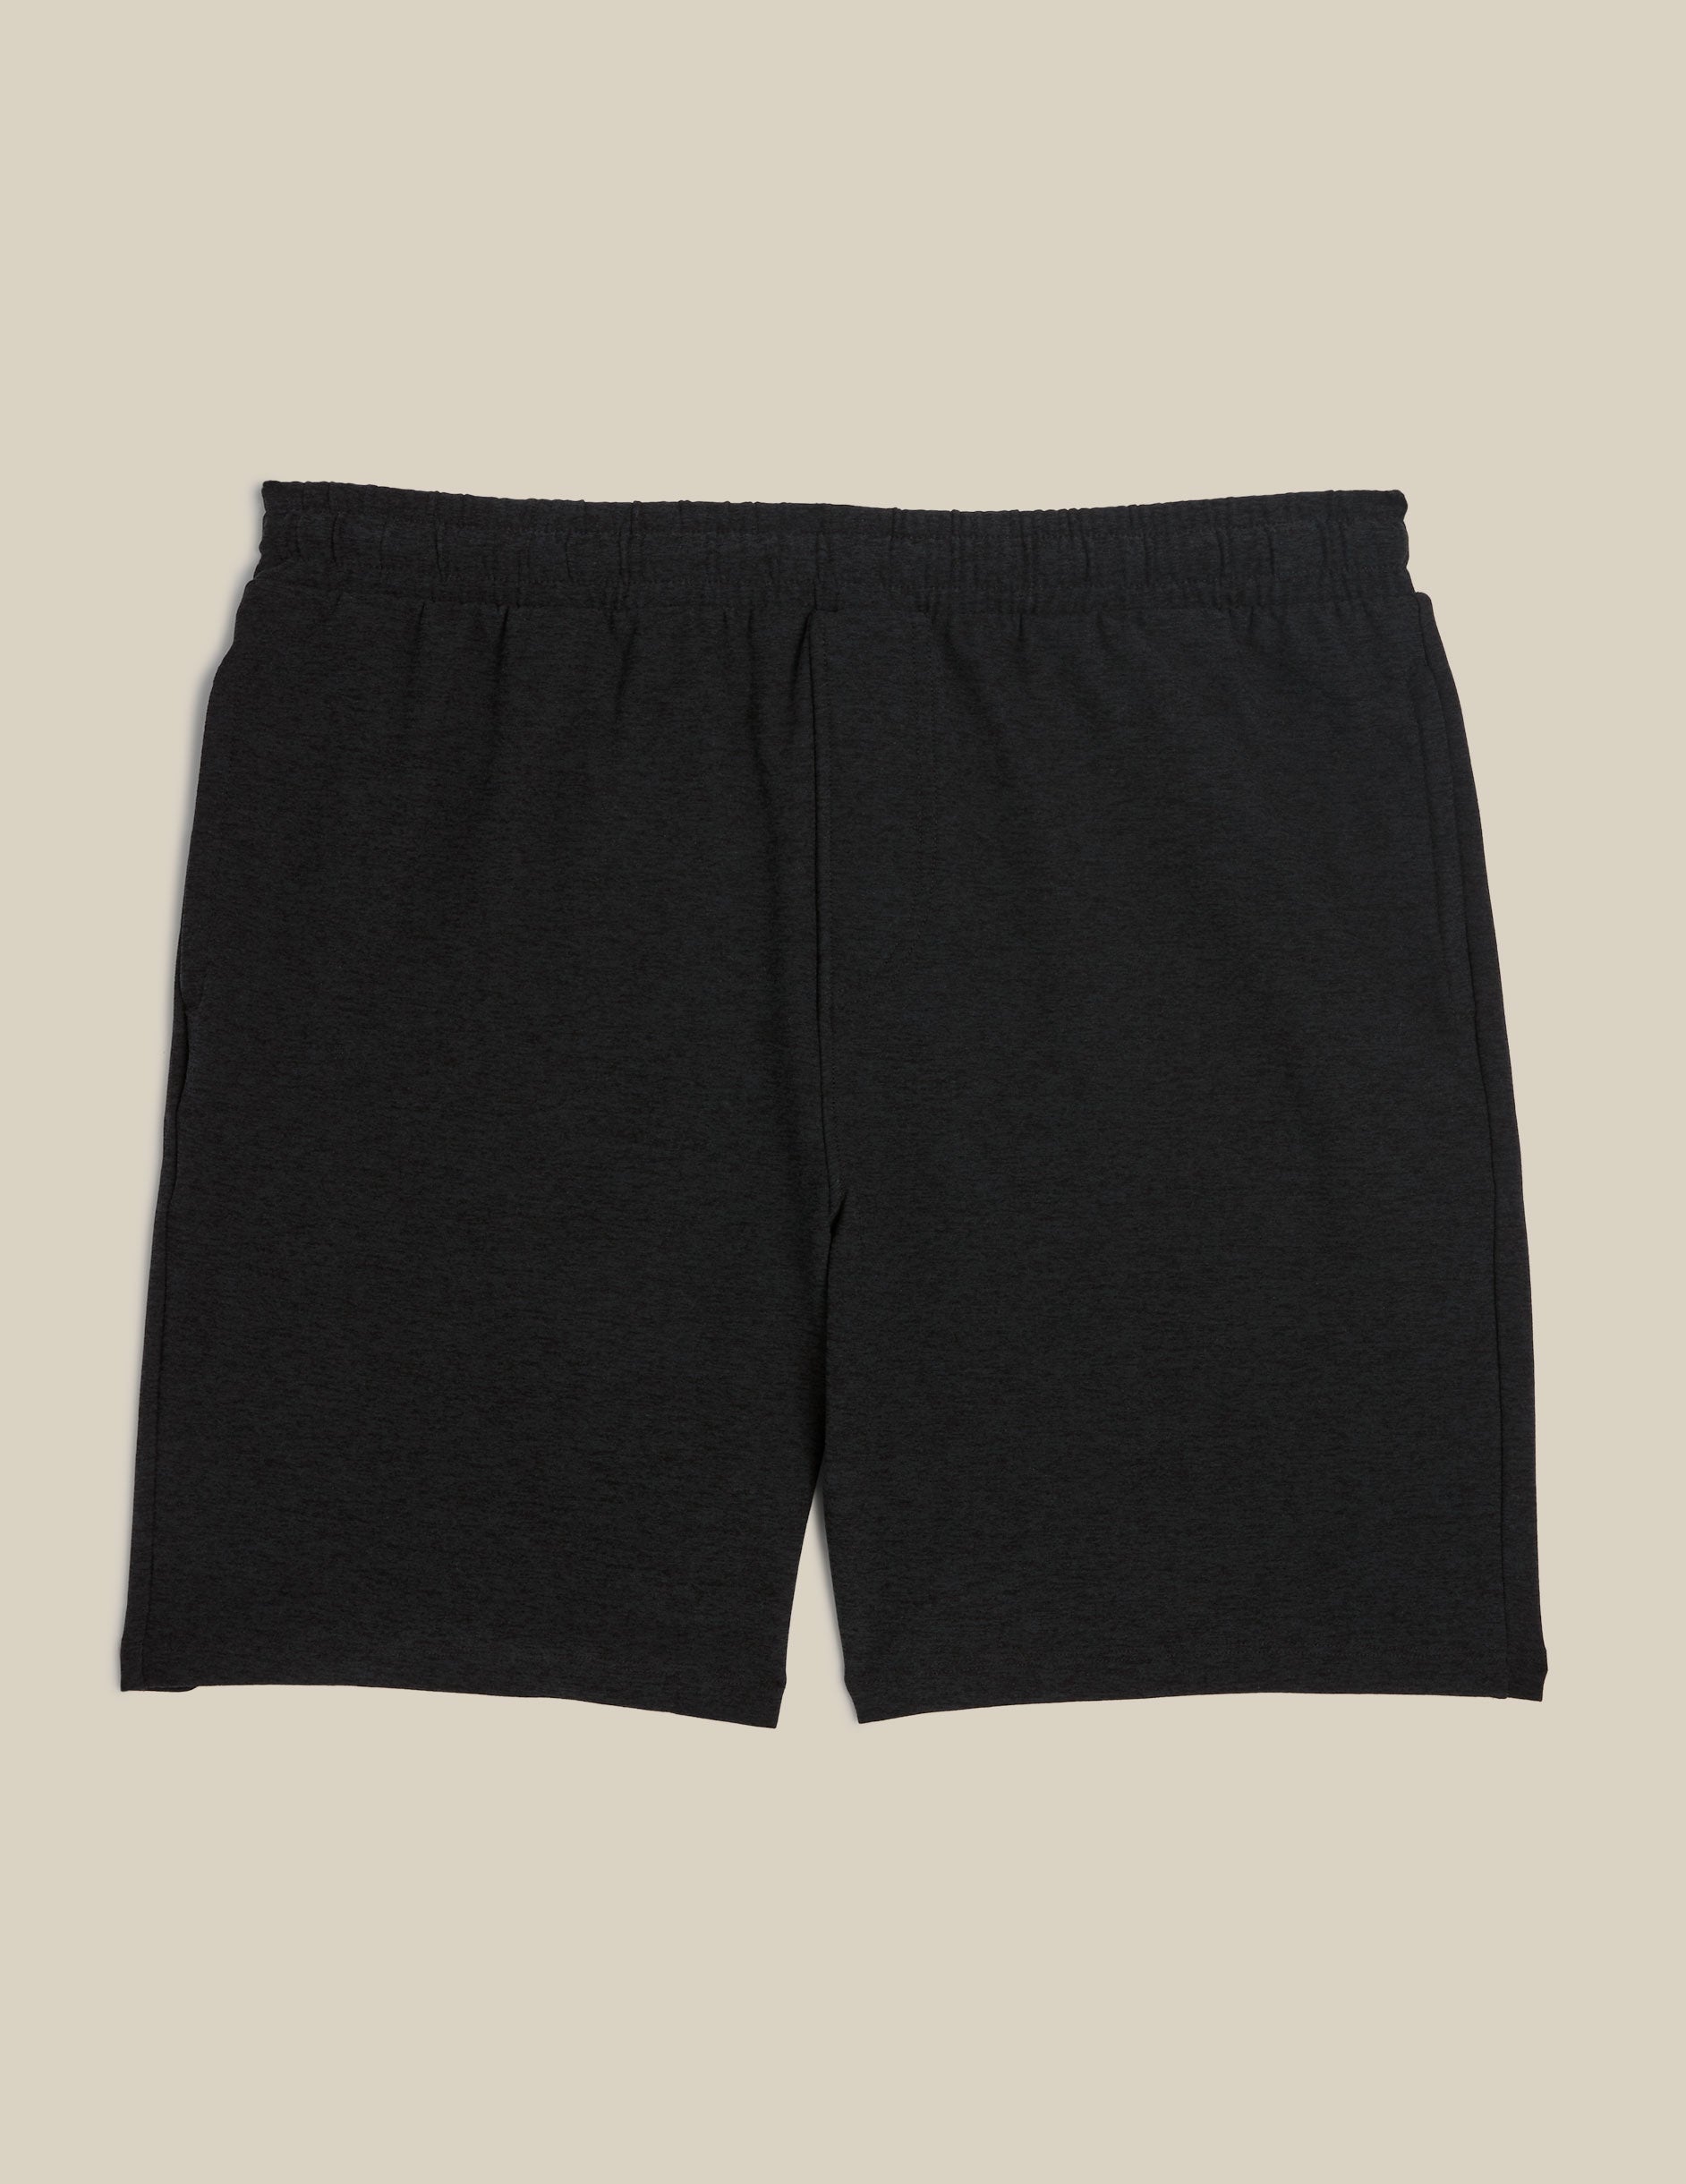 black relaxed fit men's athleisure shorts with pockets.